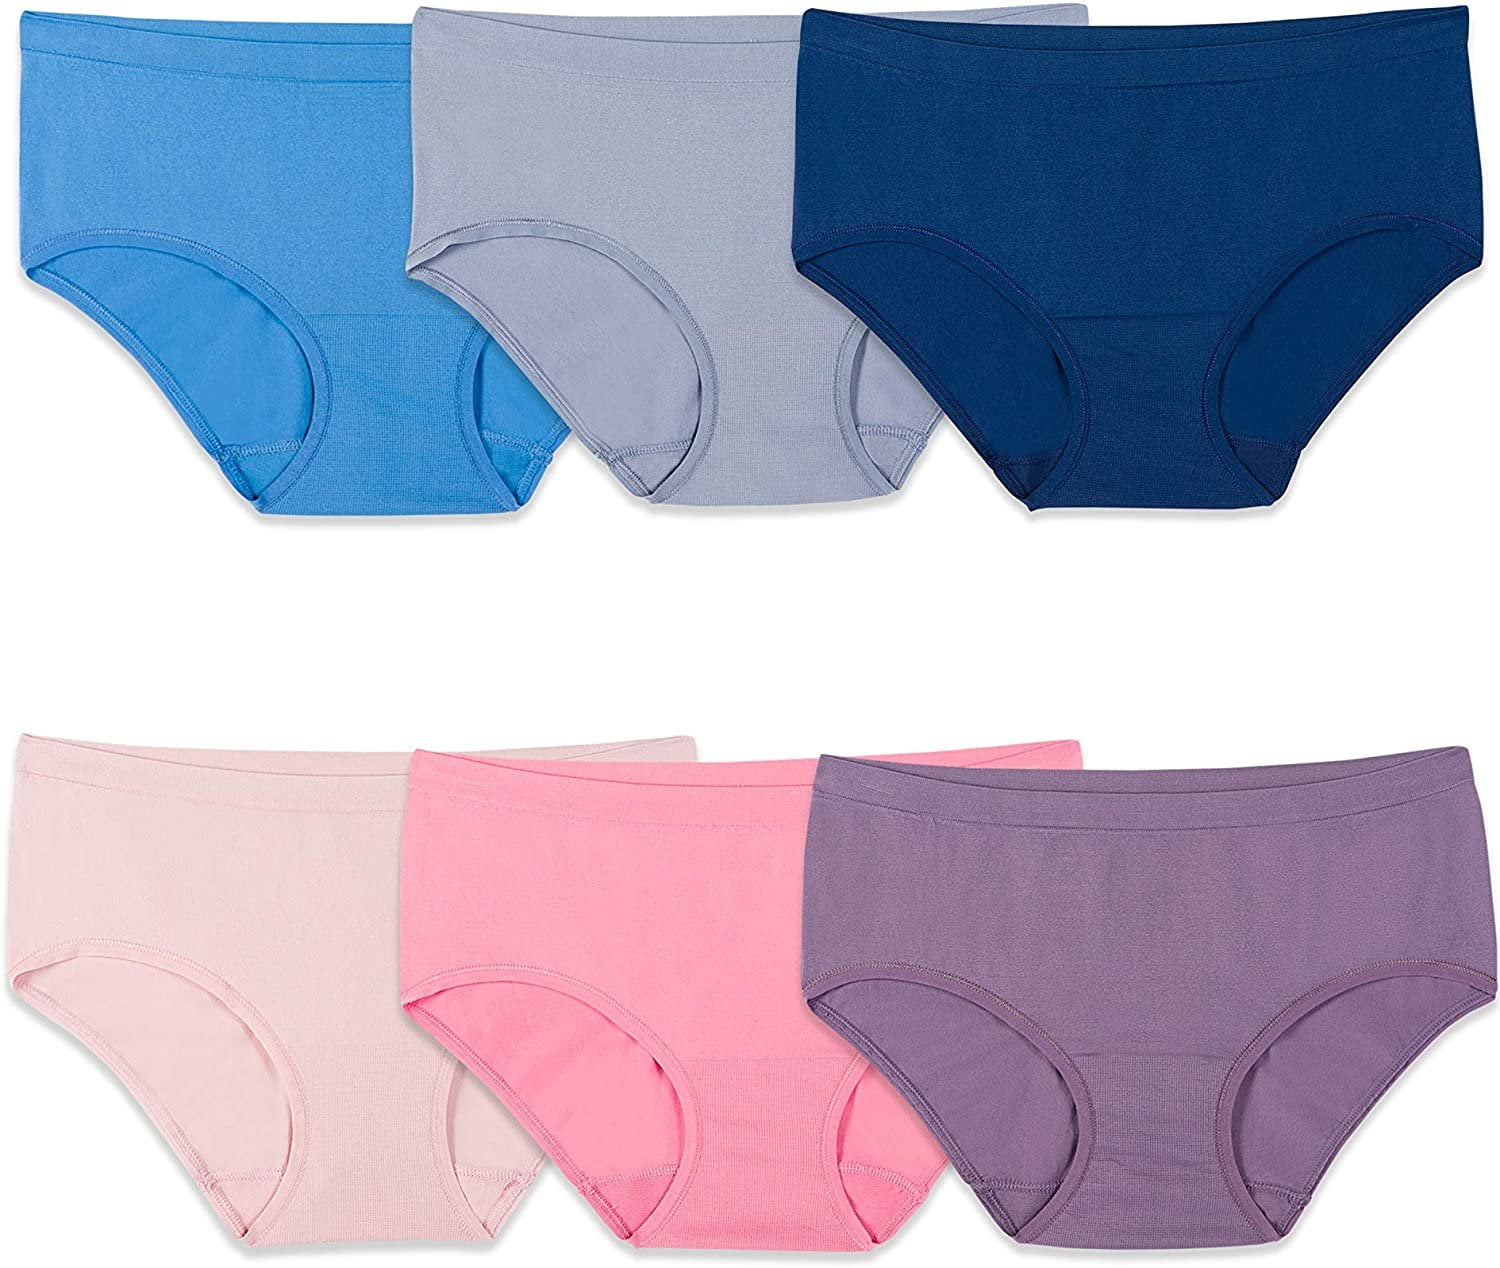 Fruit of the Loom Women's 360 Stretch Seamless Hipster Underwear, 6 Pack